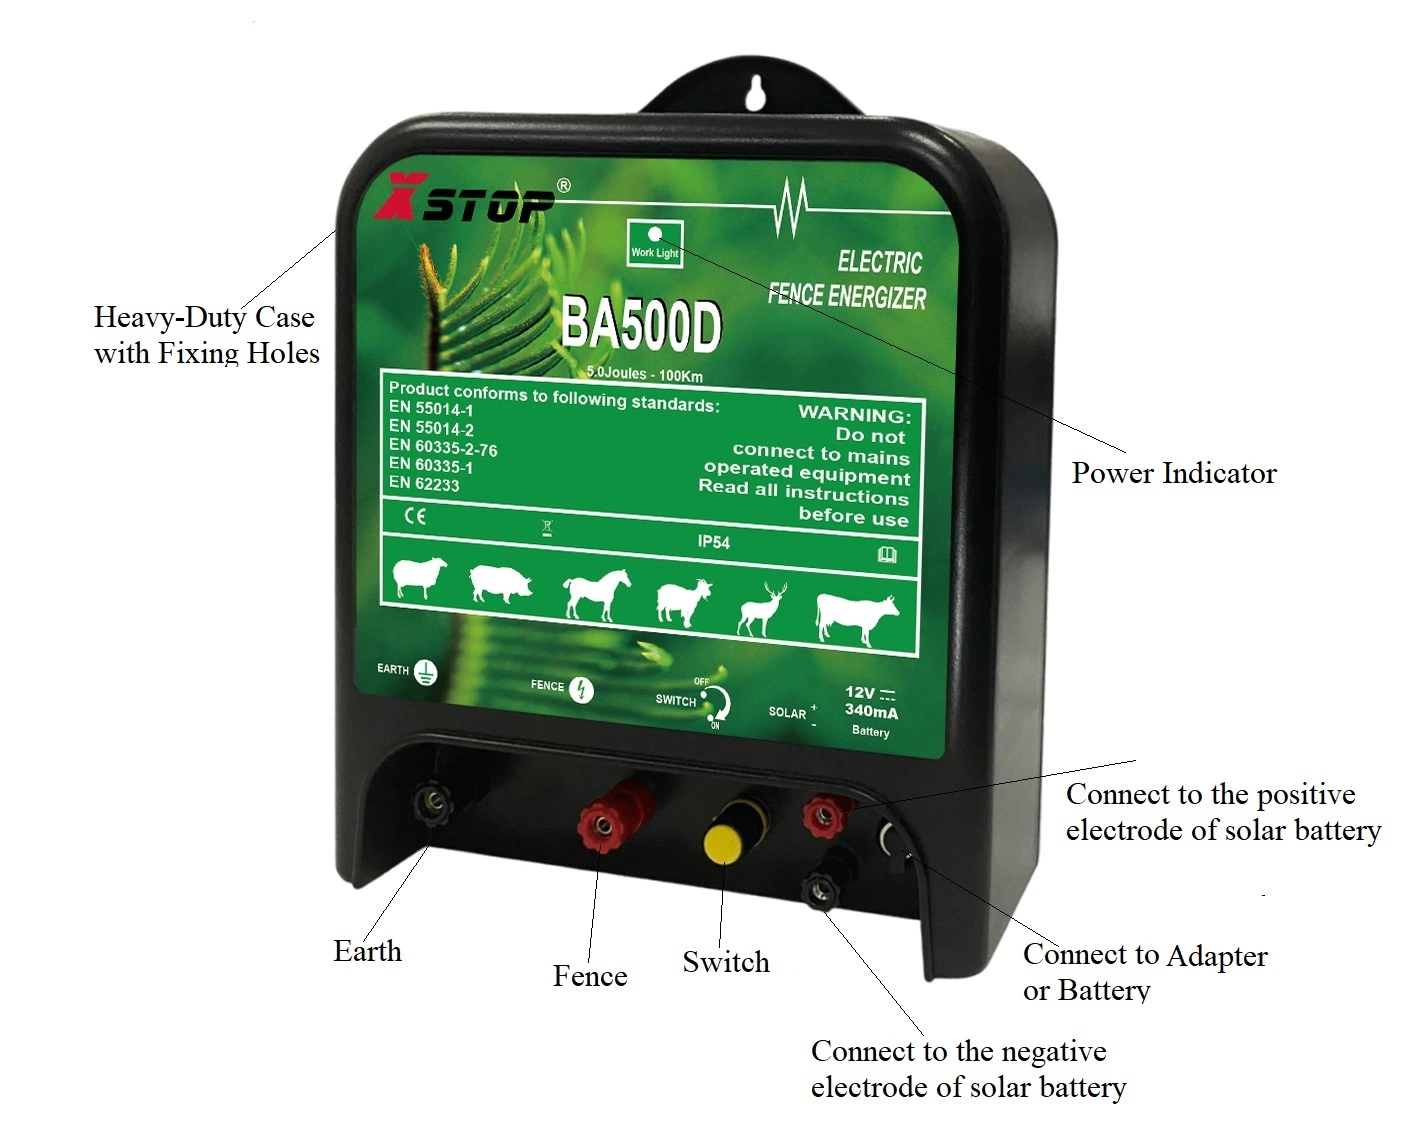 Battery Solar and Adapter Electric Fence Energizer 5 Joules to Protect Cattle Sheep and Crop